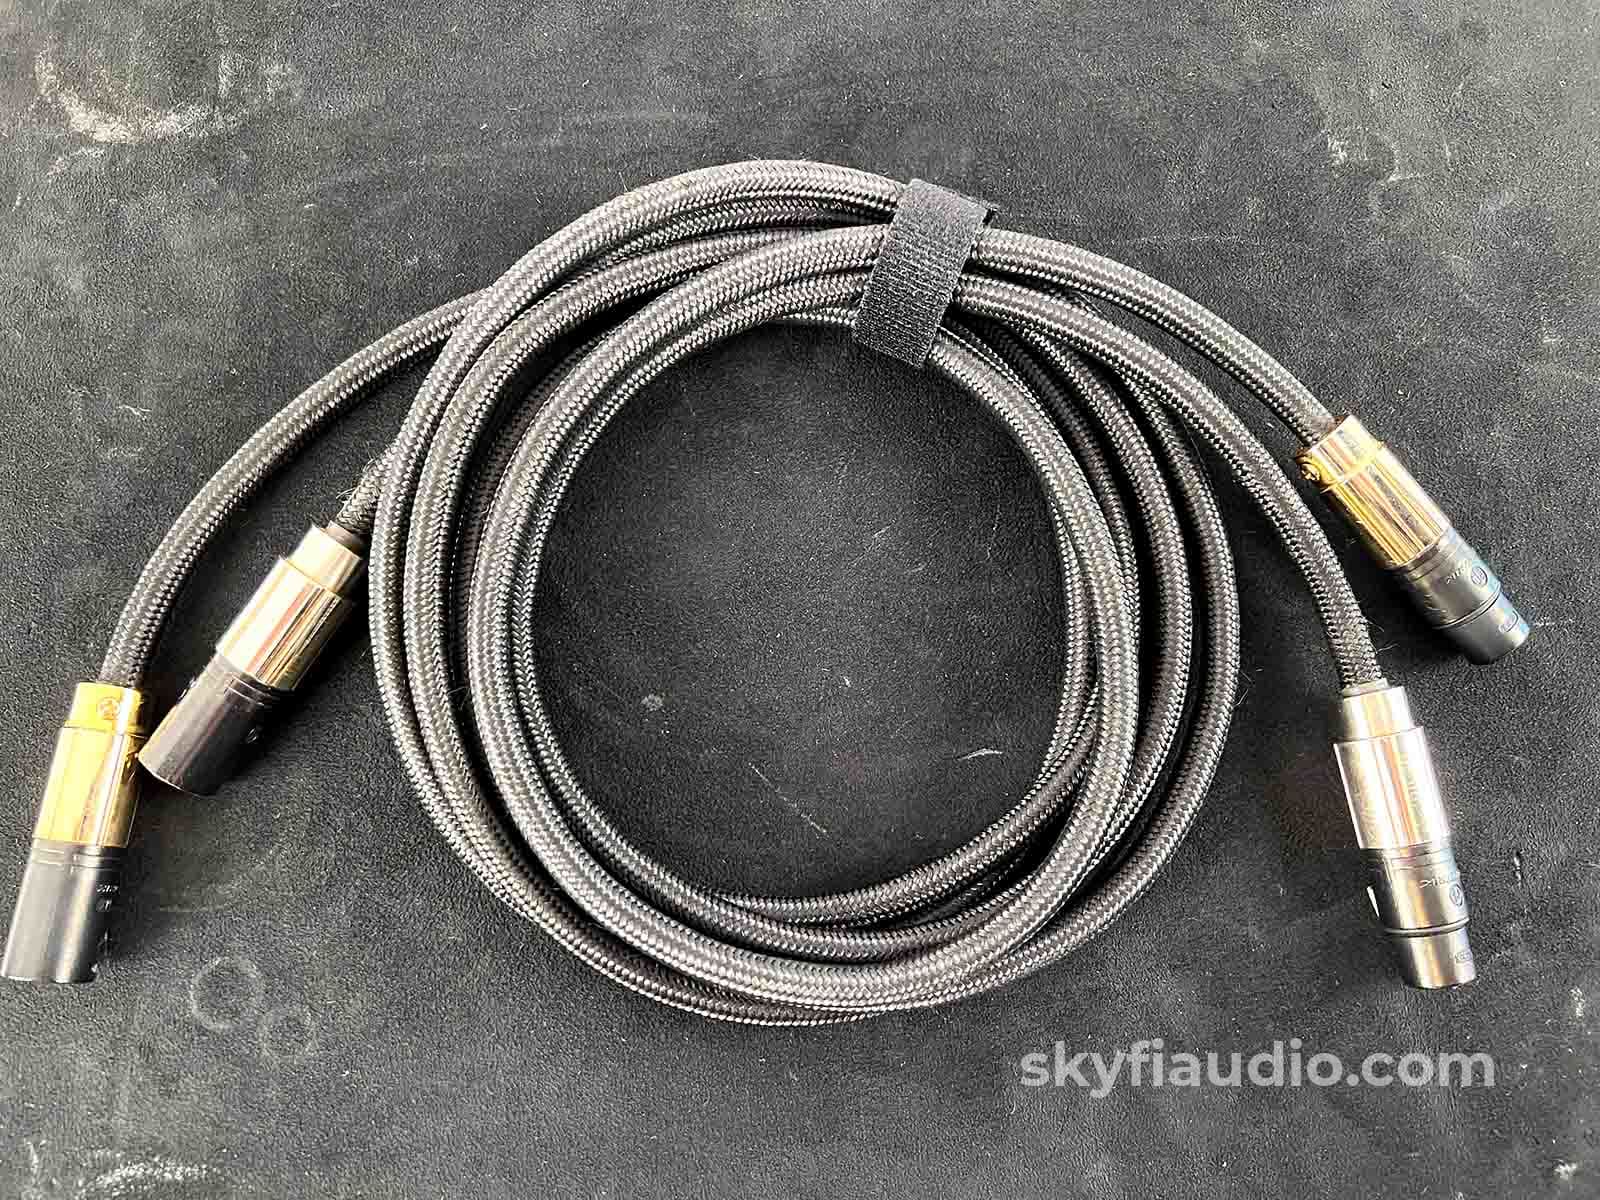 Mcintosh Xlr Audio Interconnects (Pair) - 2M In Store Only Cables